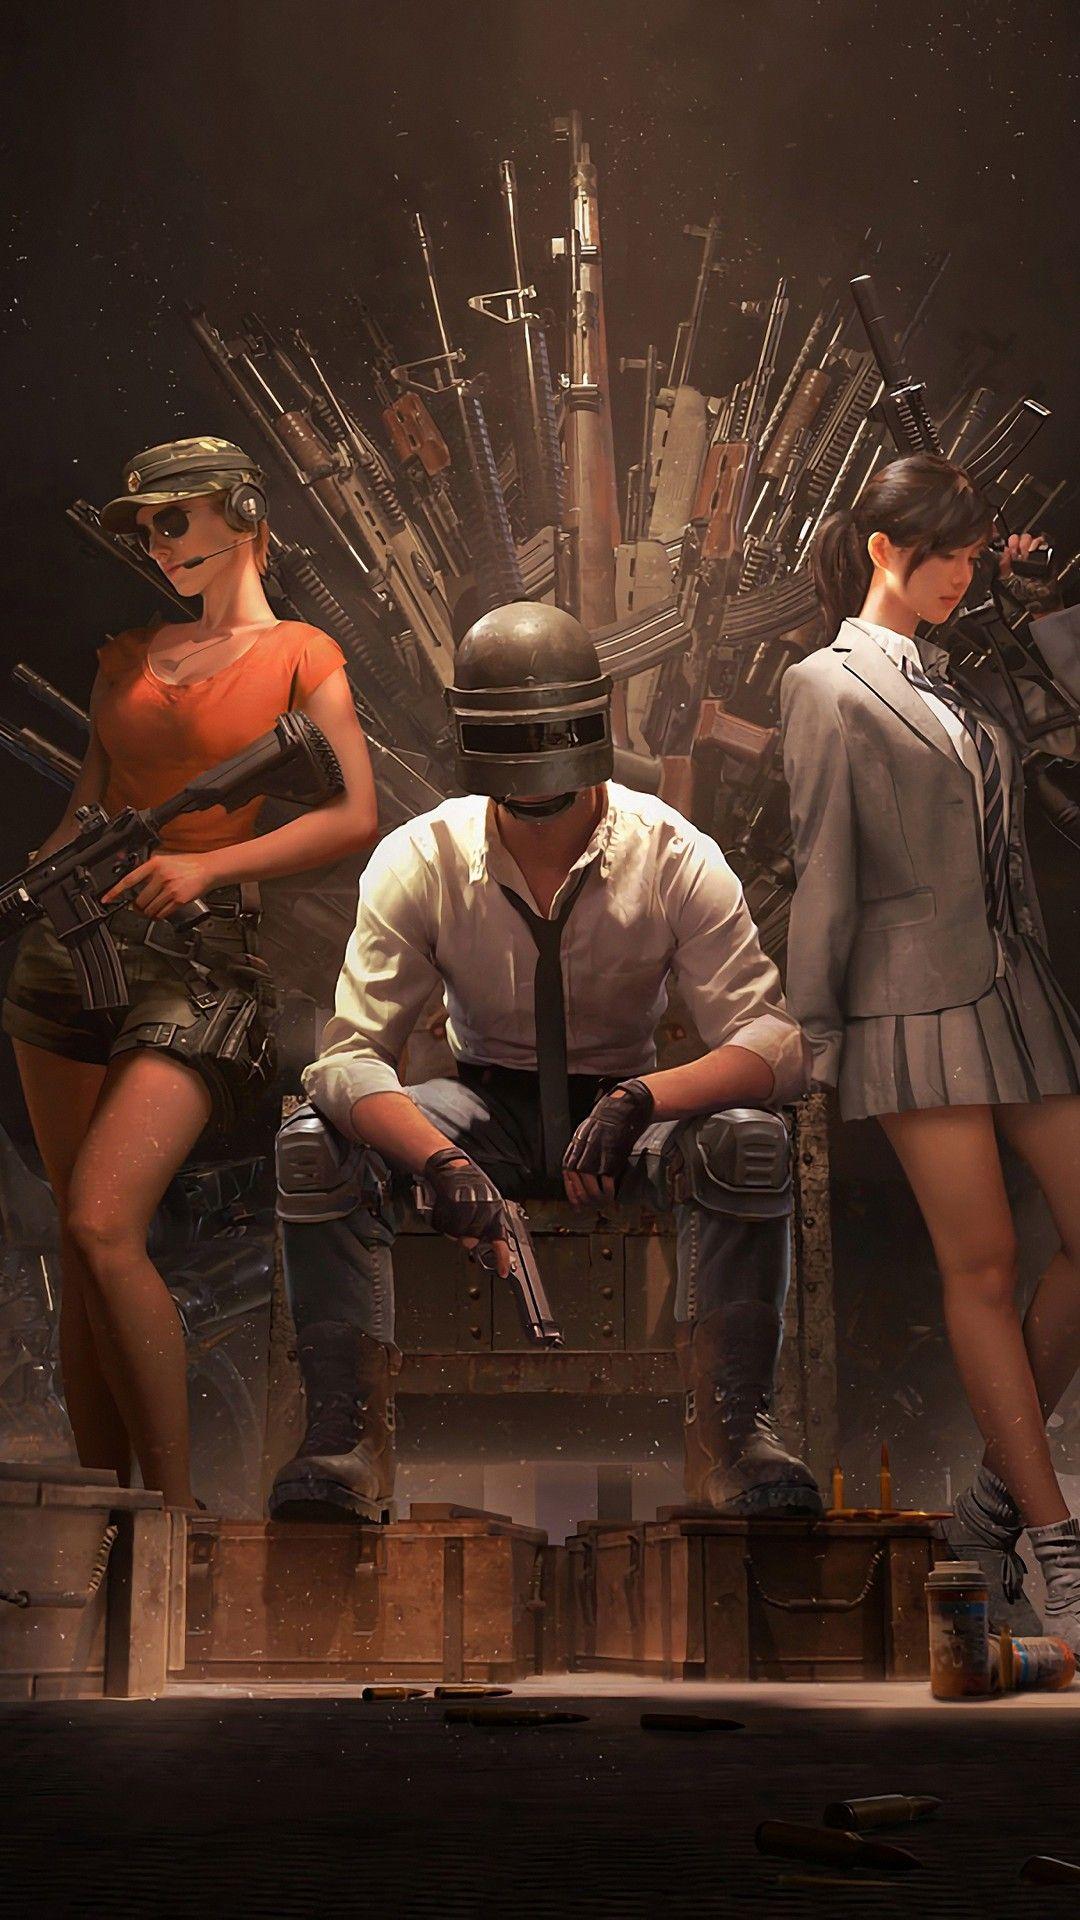 PUBG Mobile iPhone 7 Plus Wallpaper with image resolution 1080x1920 pixel. You can use this wall. iPhone 7 plus wallpaper, 7 plus wallpaper, Girl iphone wallpaper